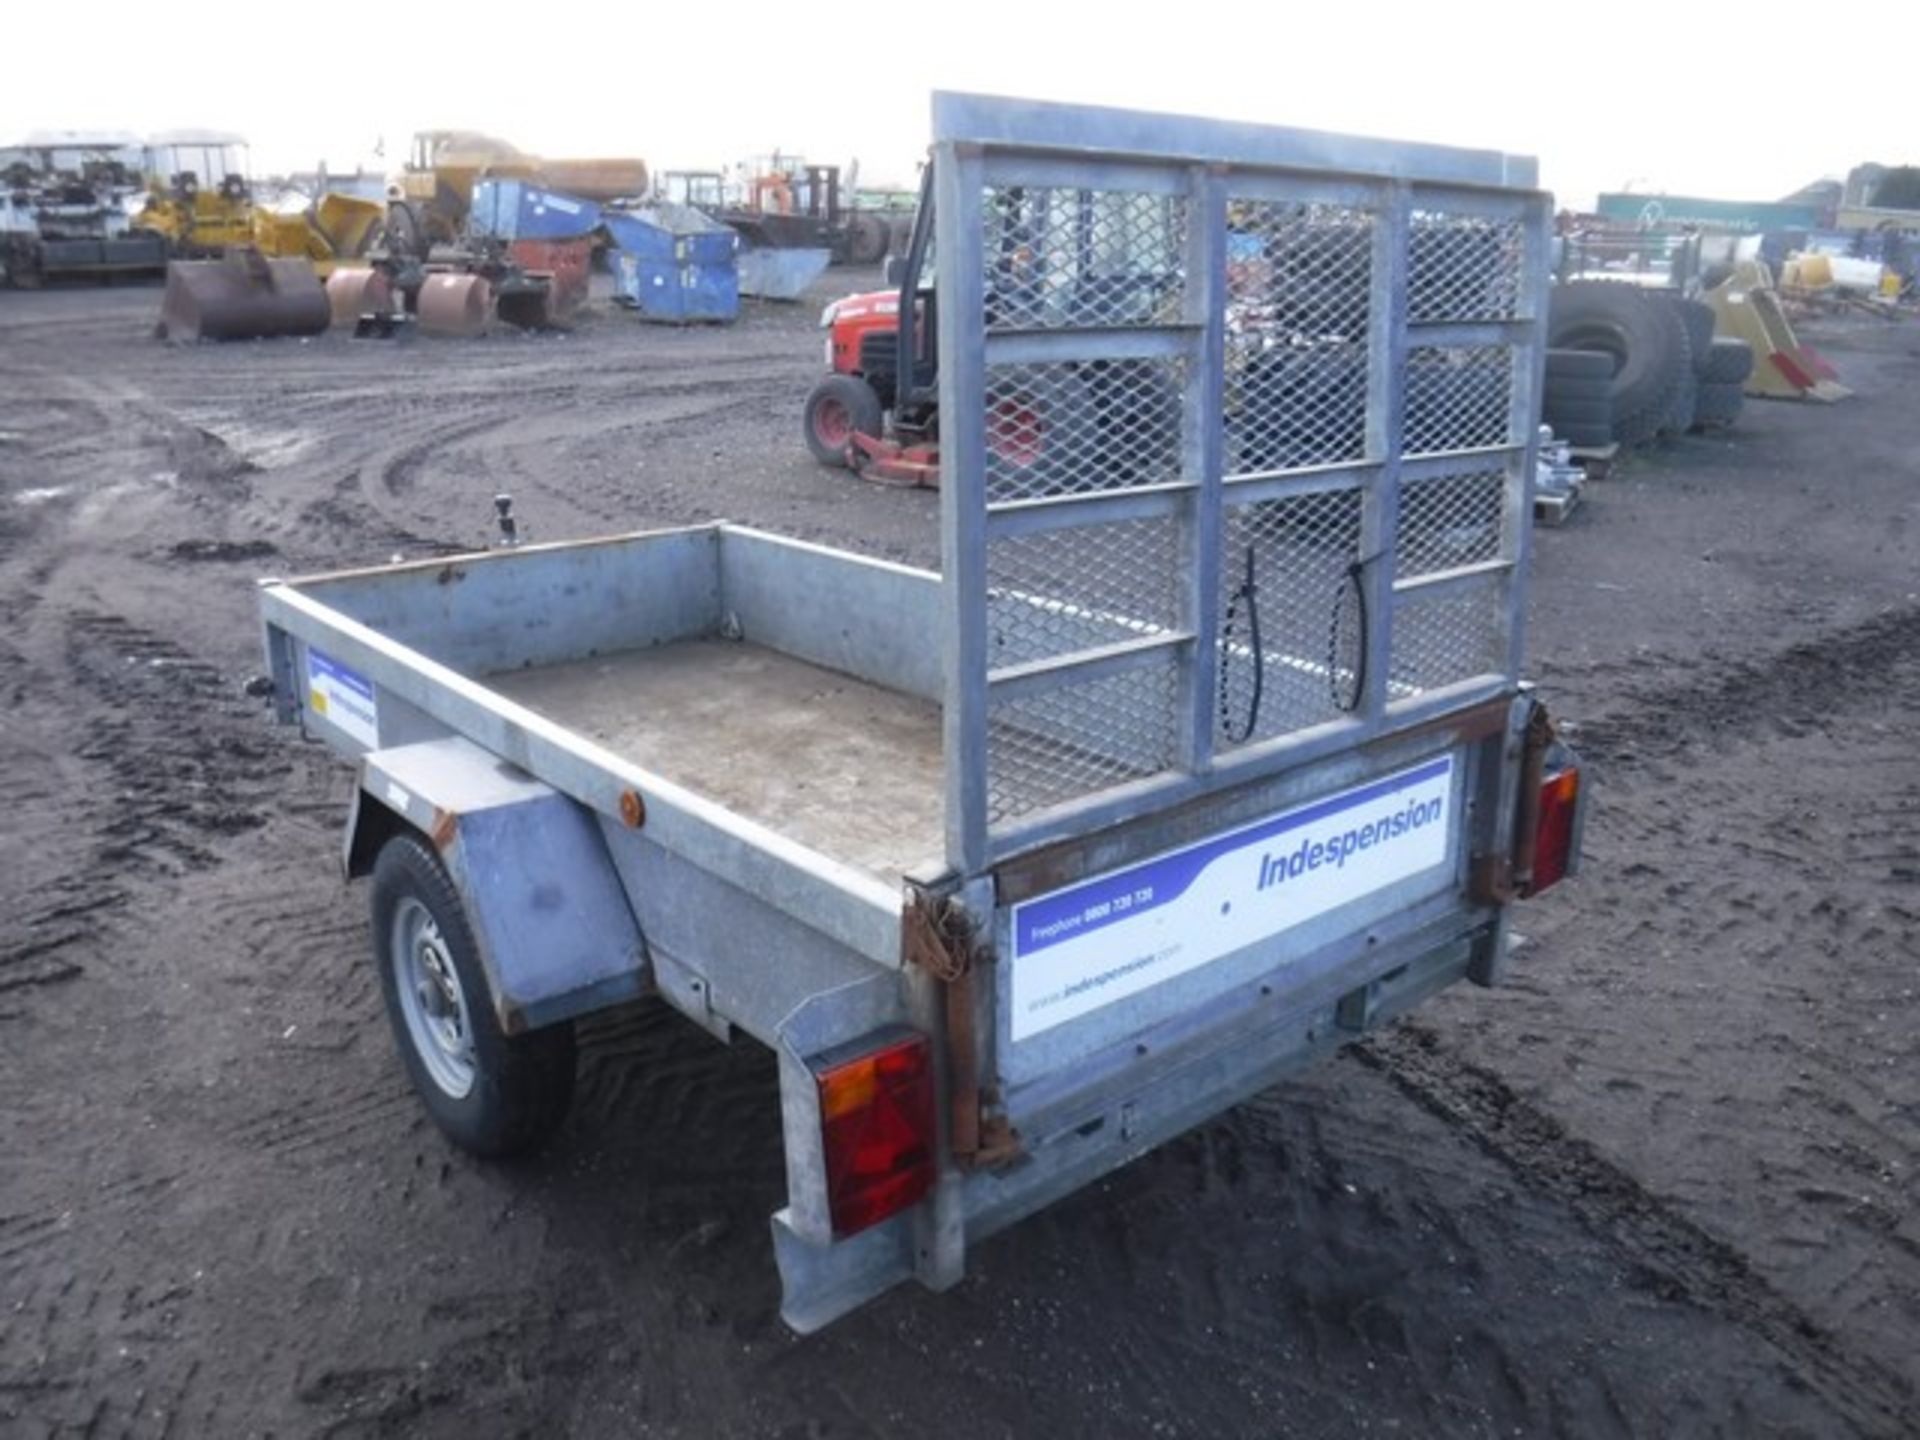 INDESPENSION 8' x 4' single axle plant trailer. S/N G138405Y. Asset No 758-5133 - Image 2 of 5